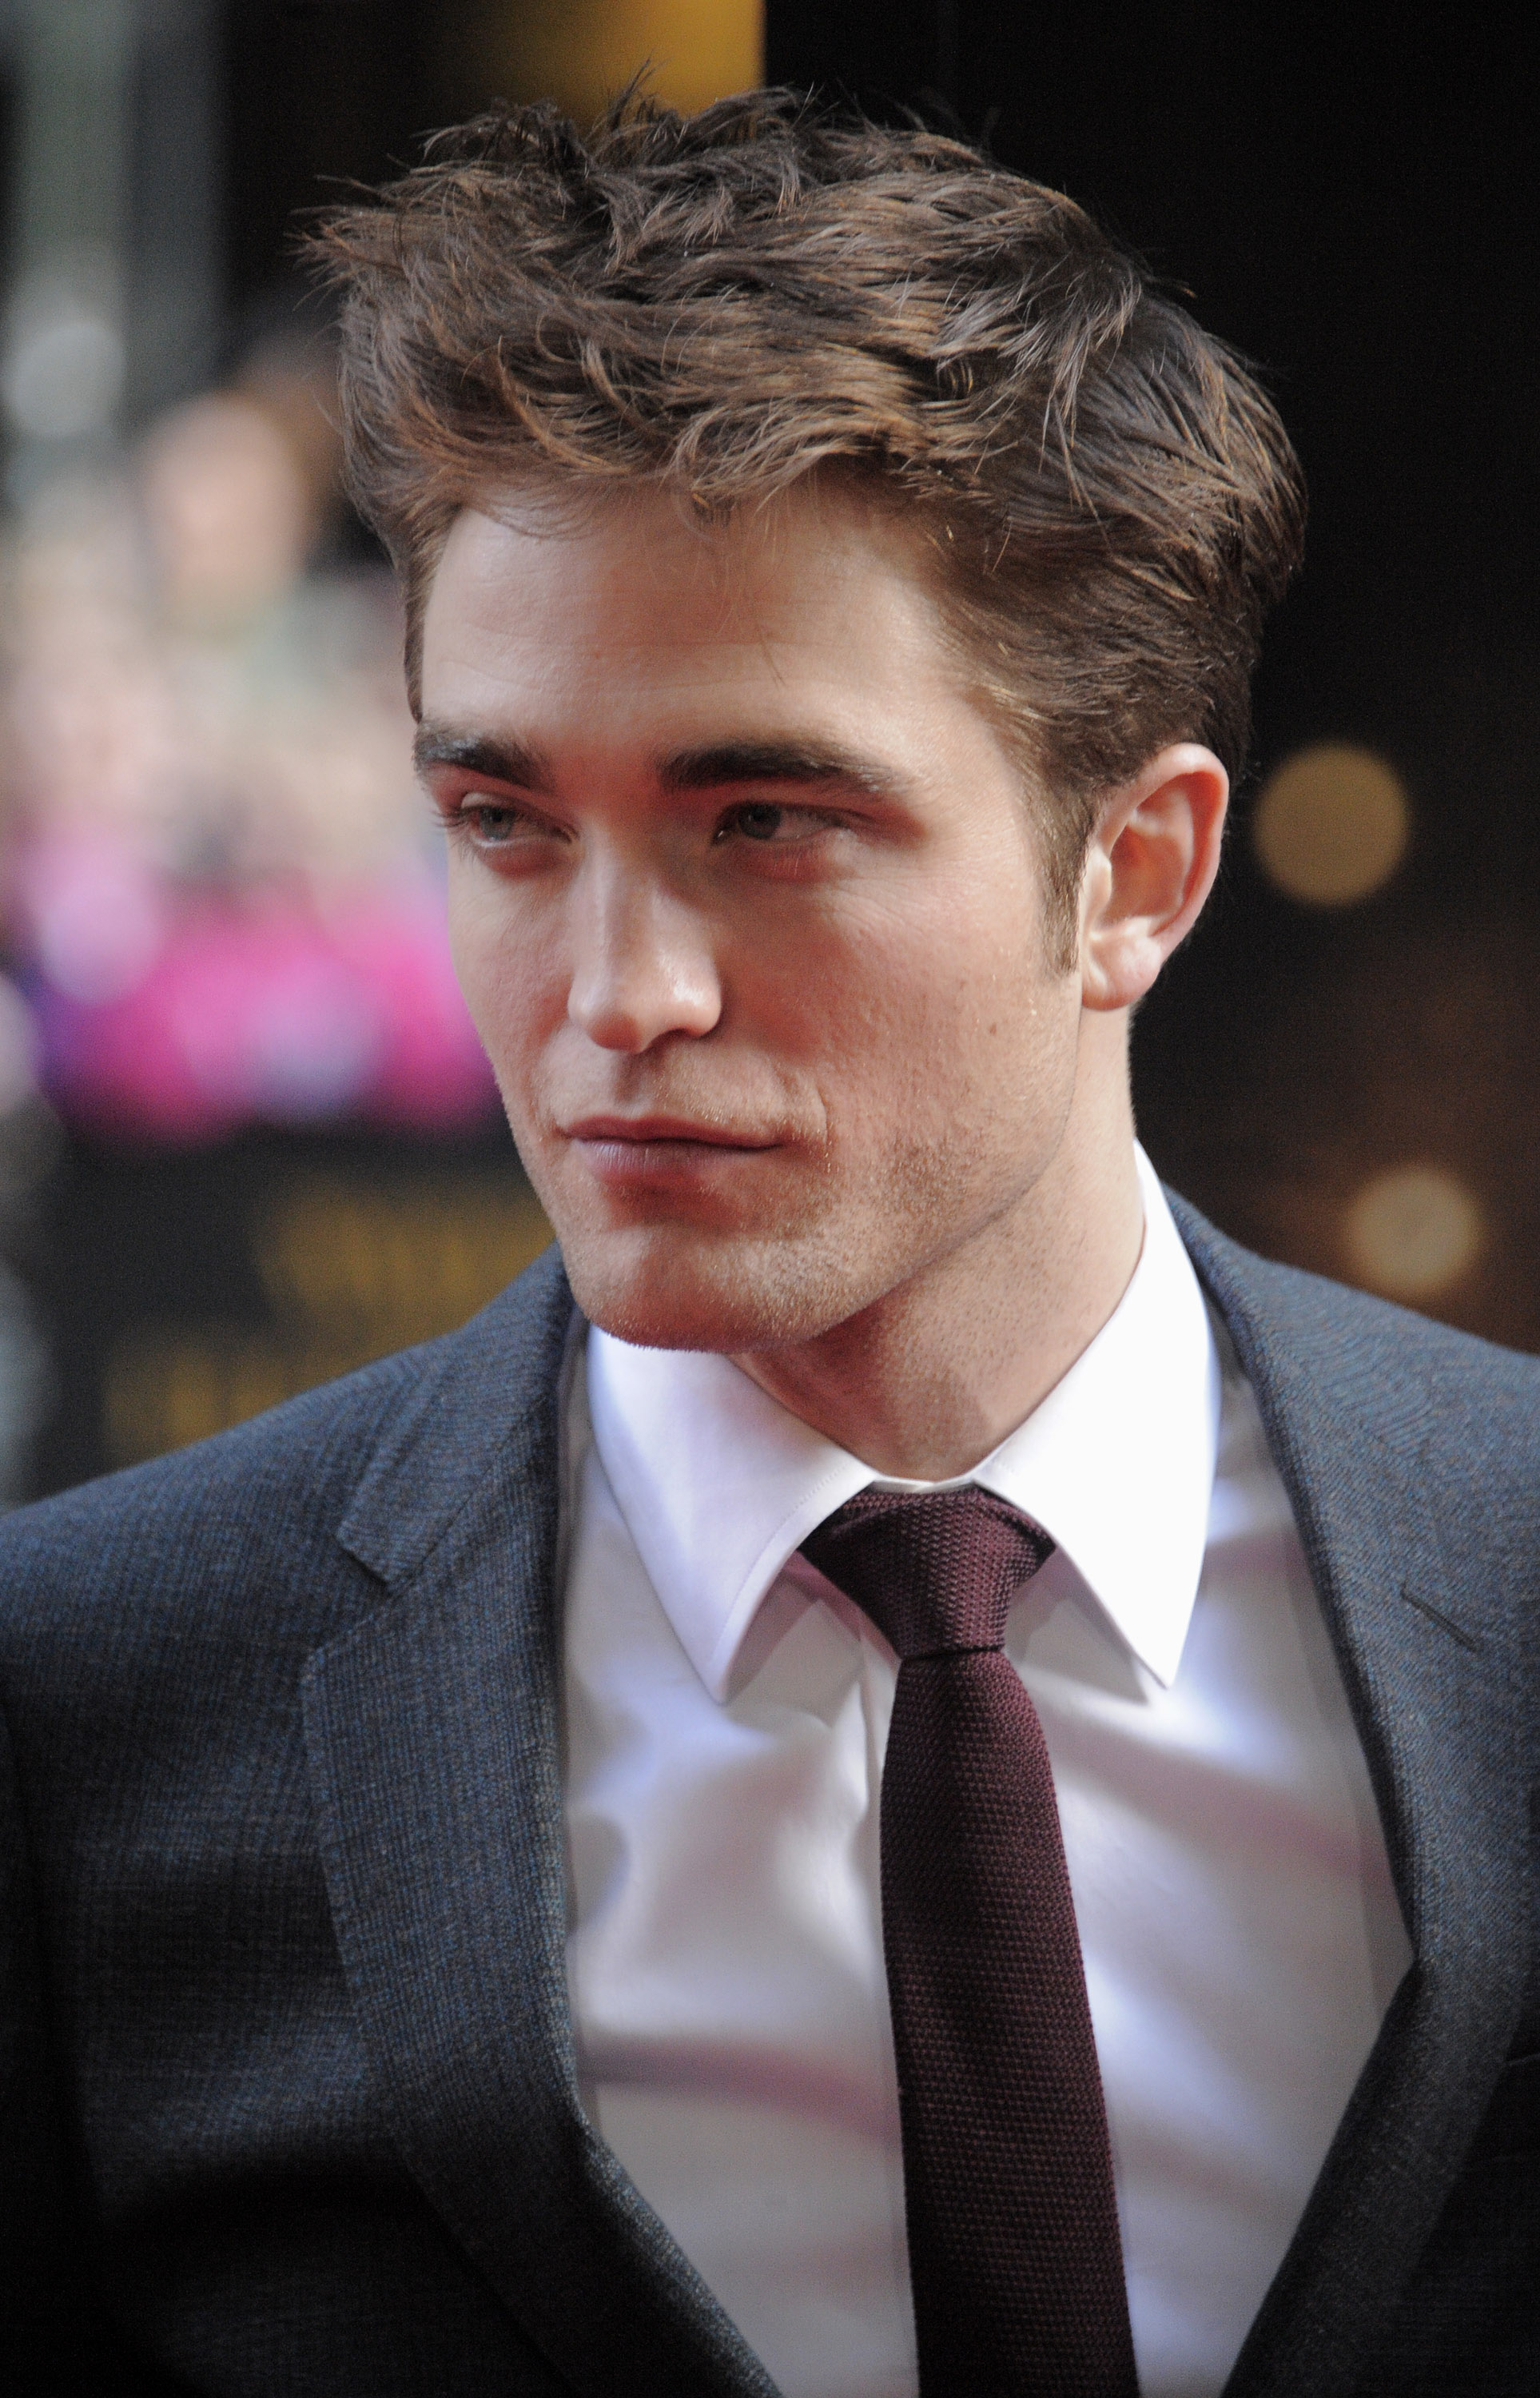 Robert Pattinson on Next Movies ‘Actors to watch in 2012’ List | Thinking of Rob